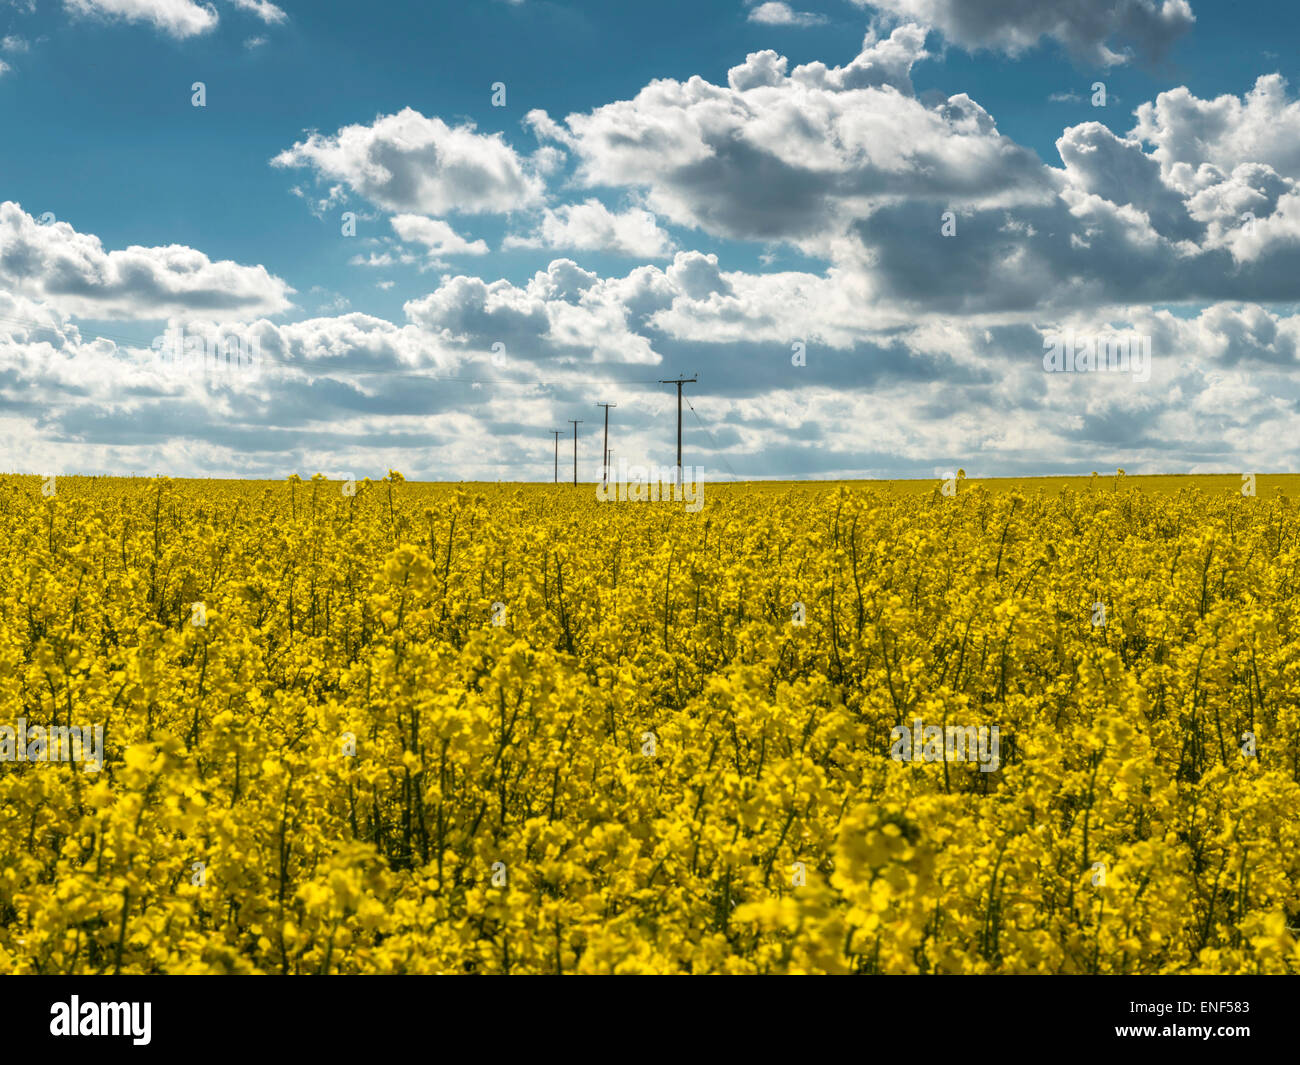 English County Landscape - Storm Clouds over Golden Rapeseed Field Stock Photo